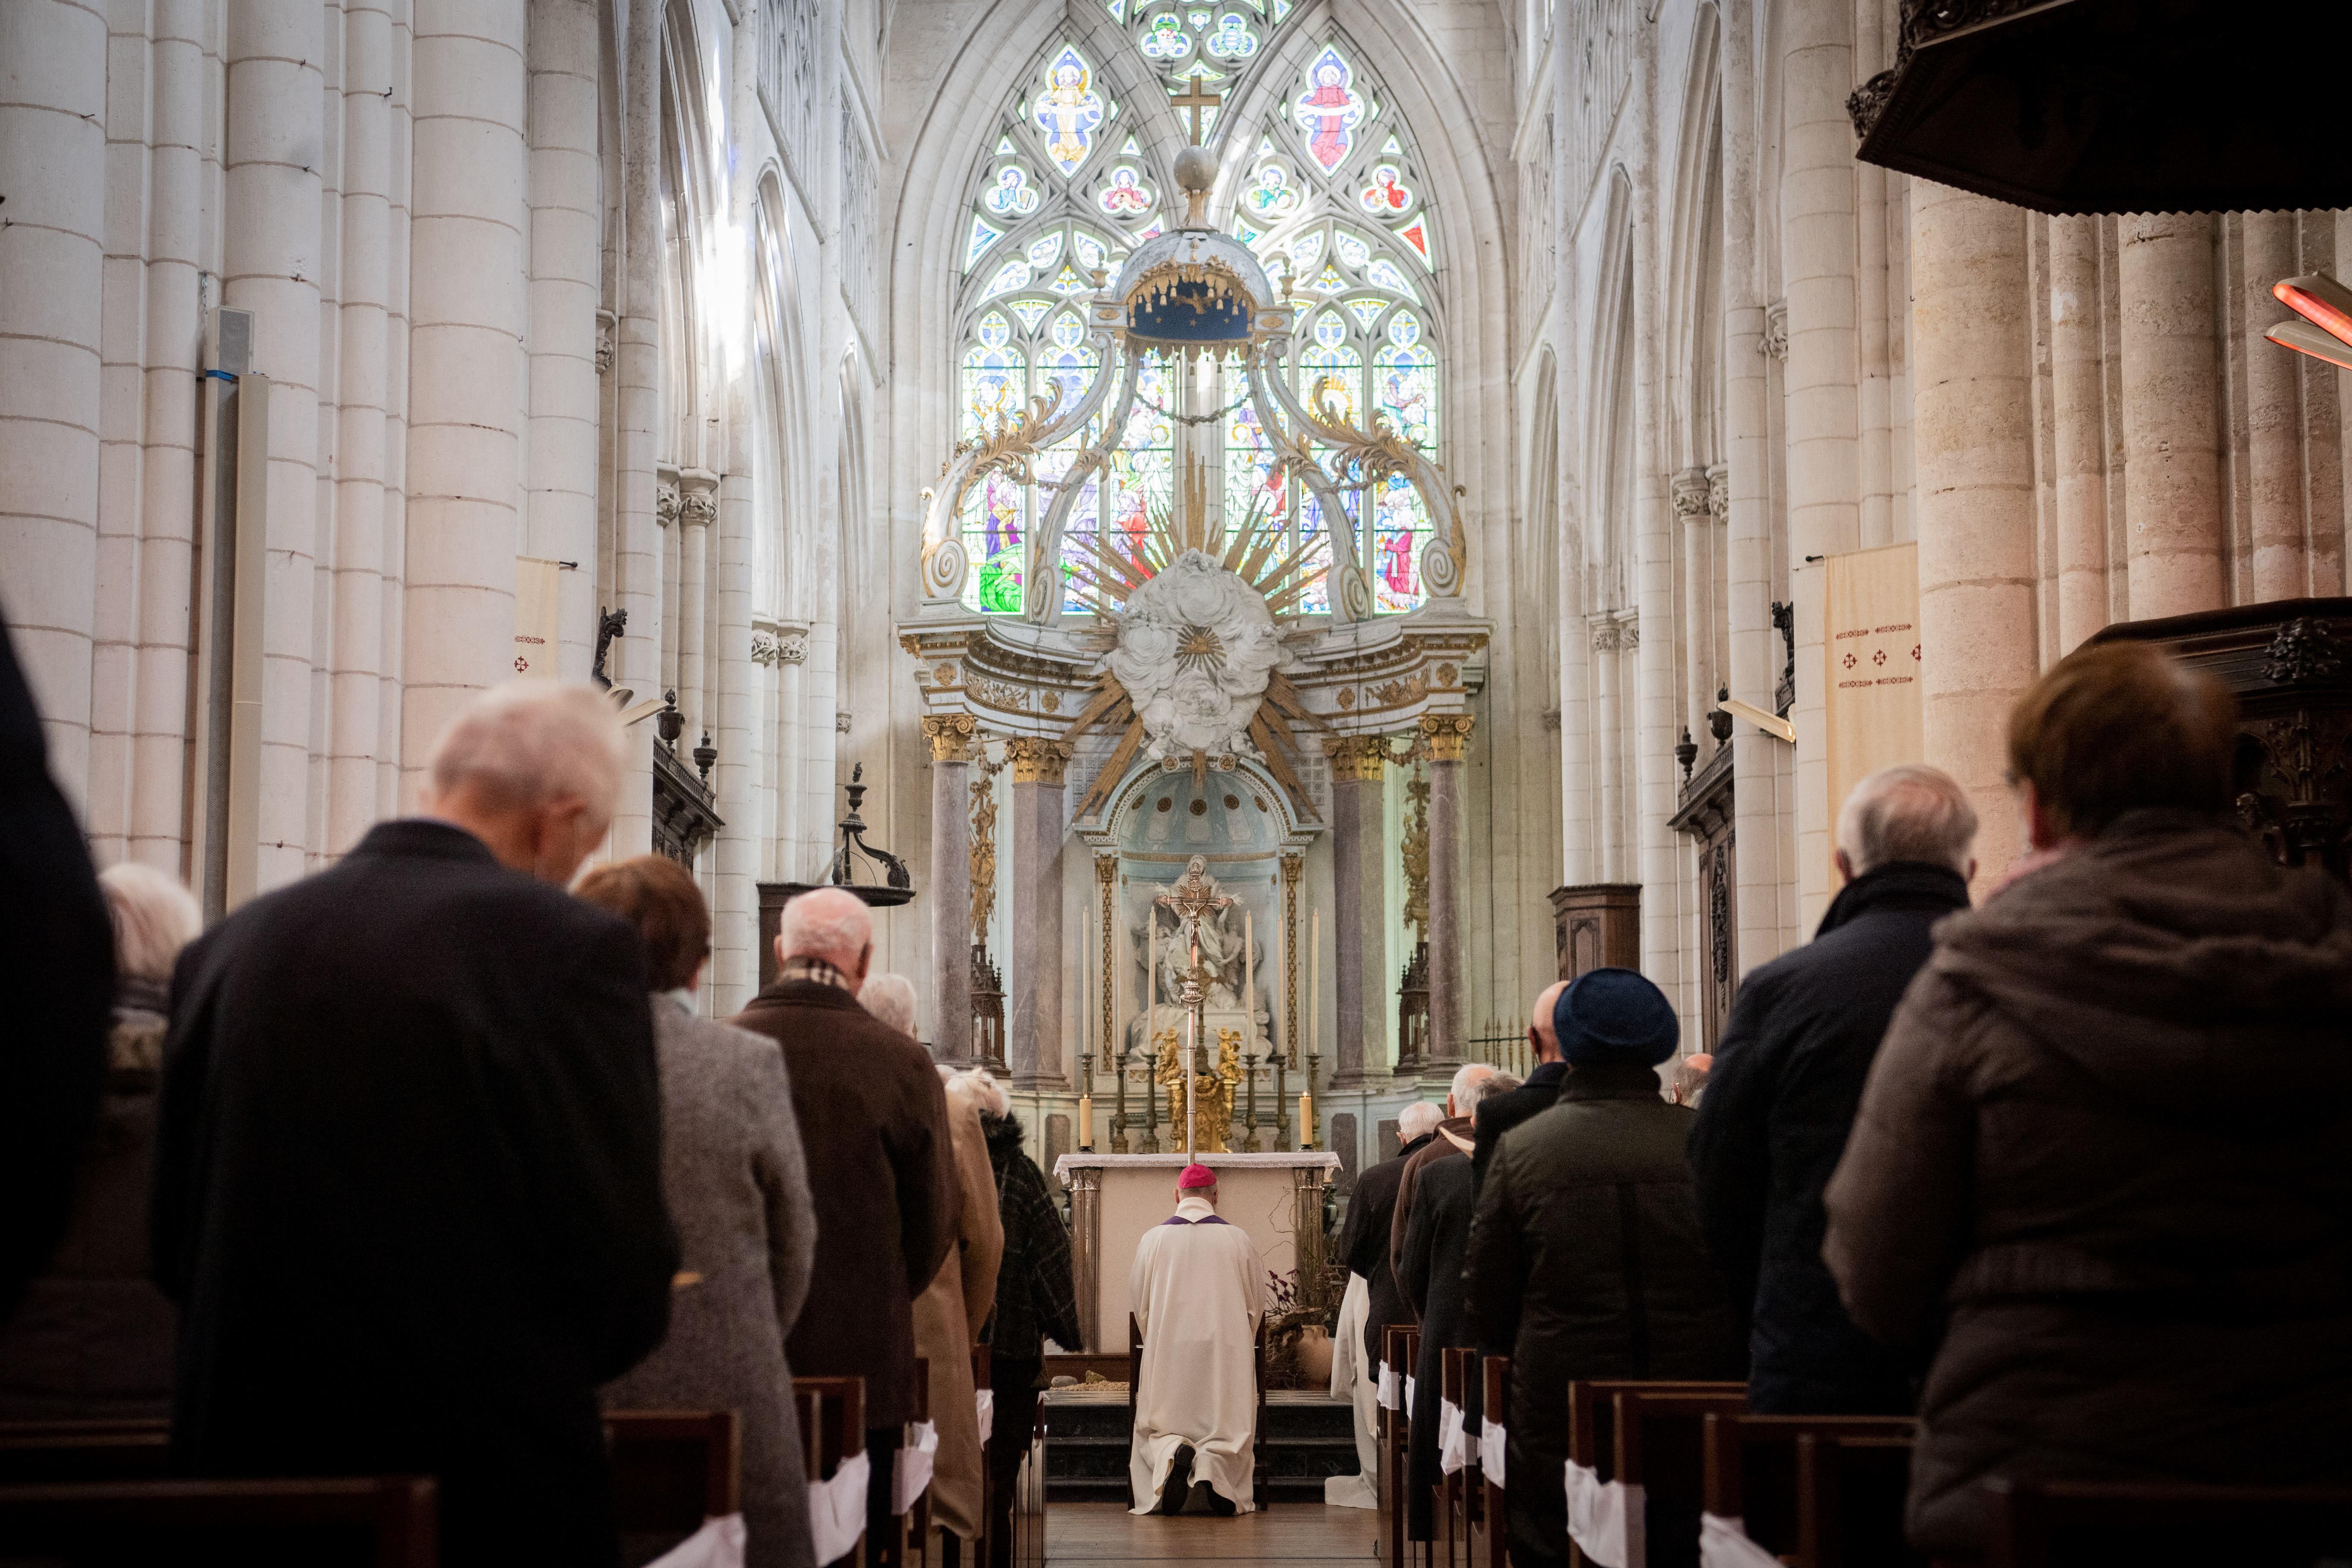 A bishop kneels in front of an alter in a crowded church.